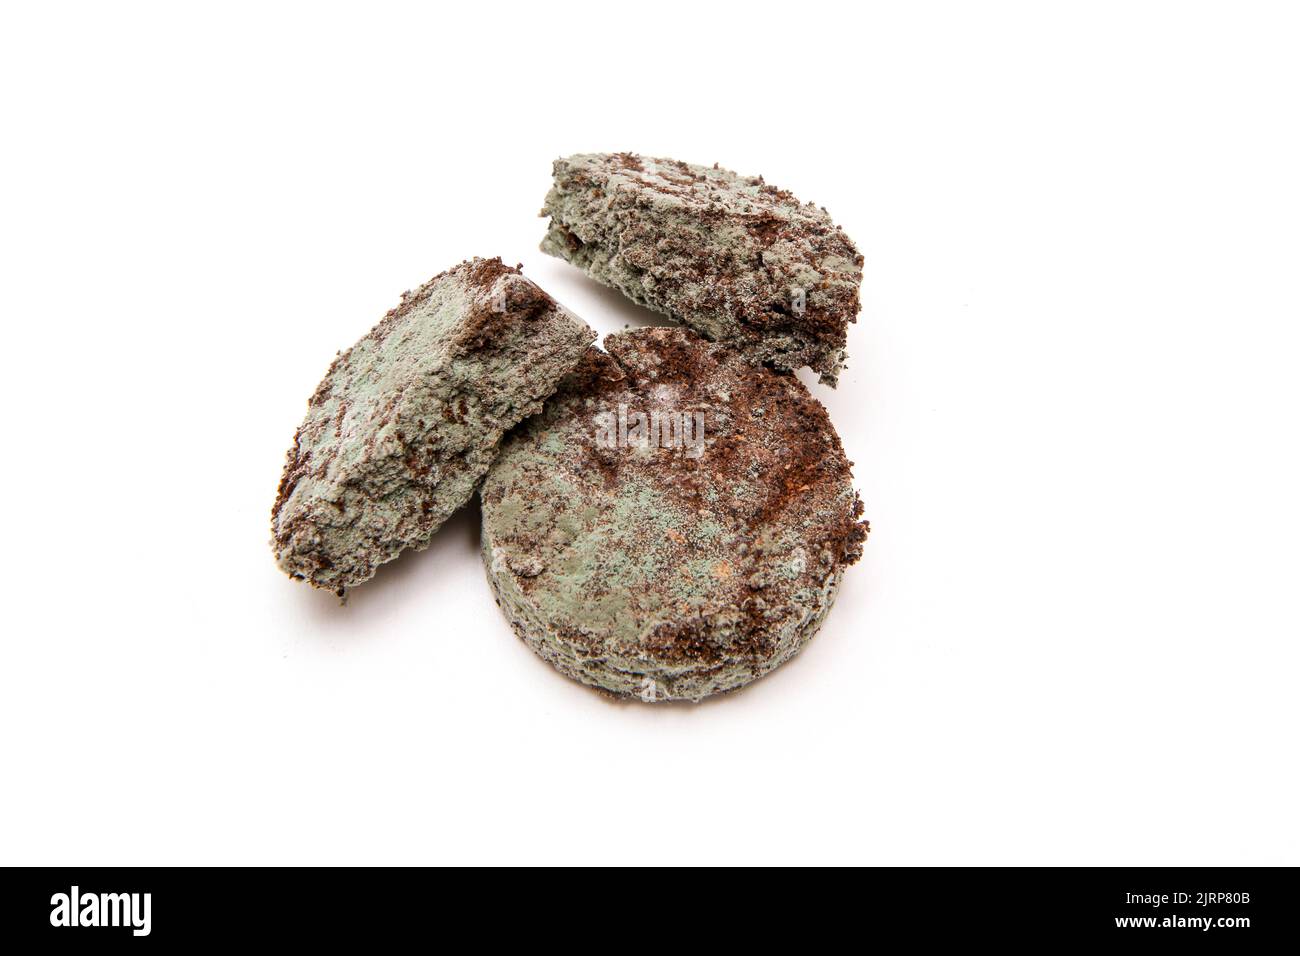 The three mouldy grounded coffee capsules from the coffee machine because of bad cleaning or forgotten. Stock Photo